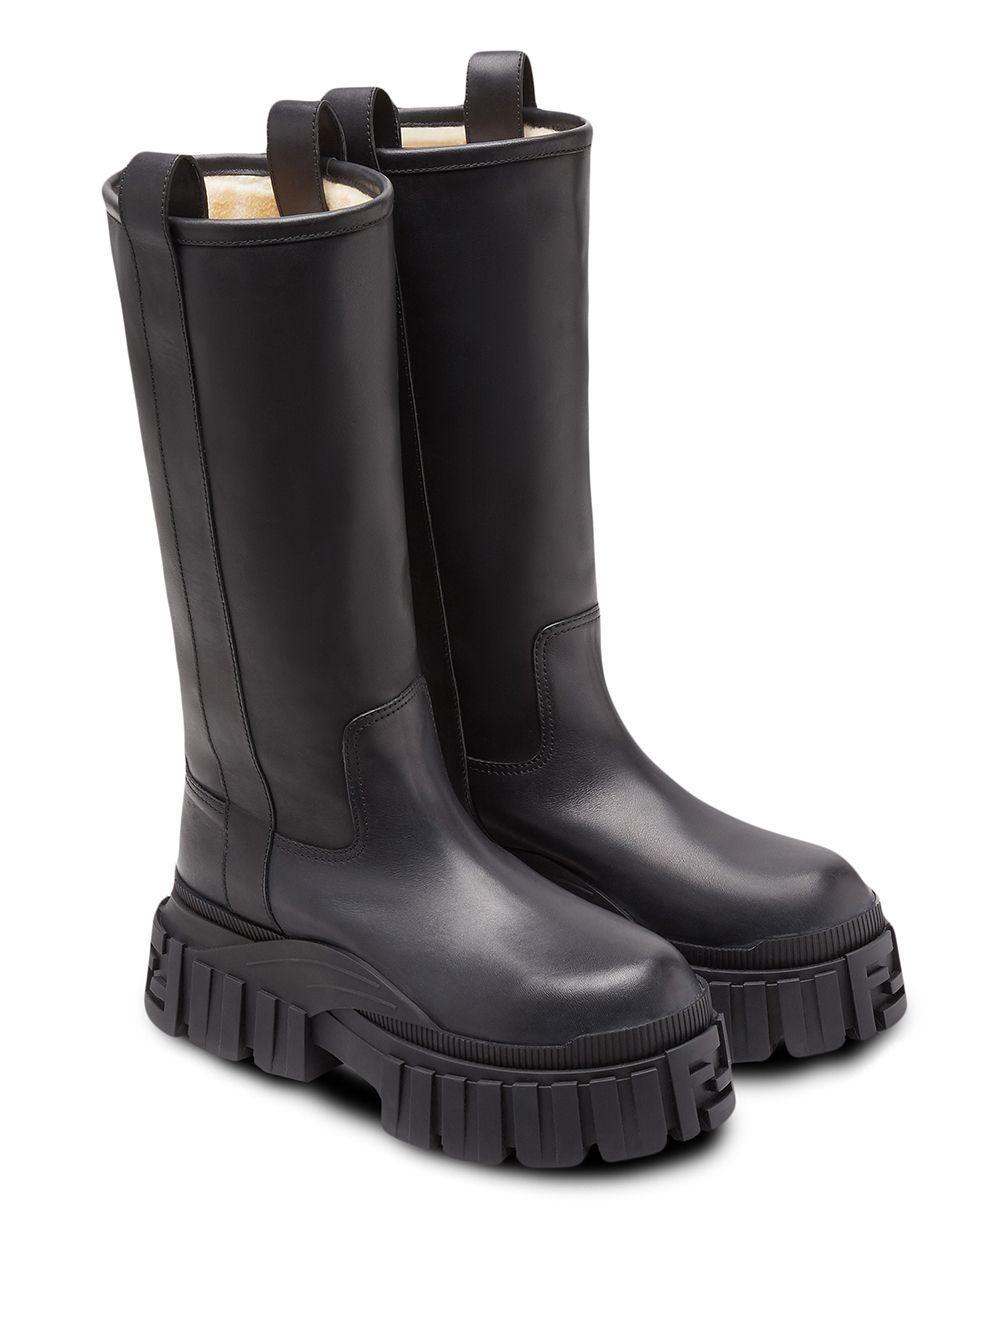 Fendi Chunky Mid-calf Boots in Black for Men - Lyst